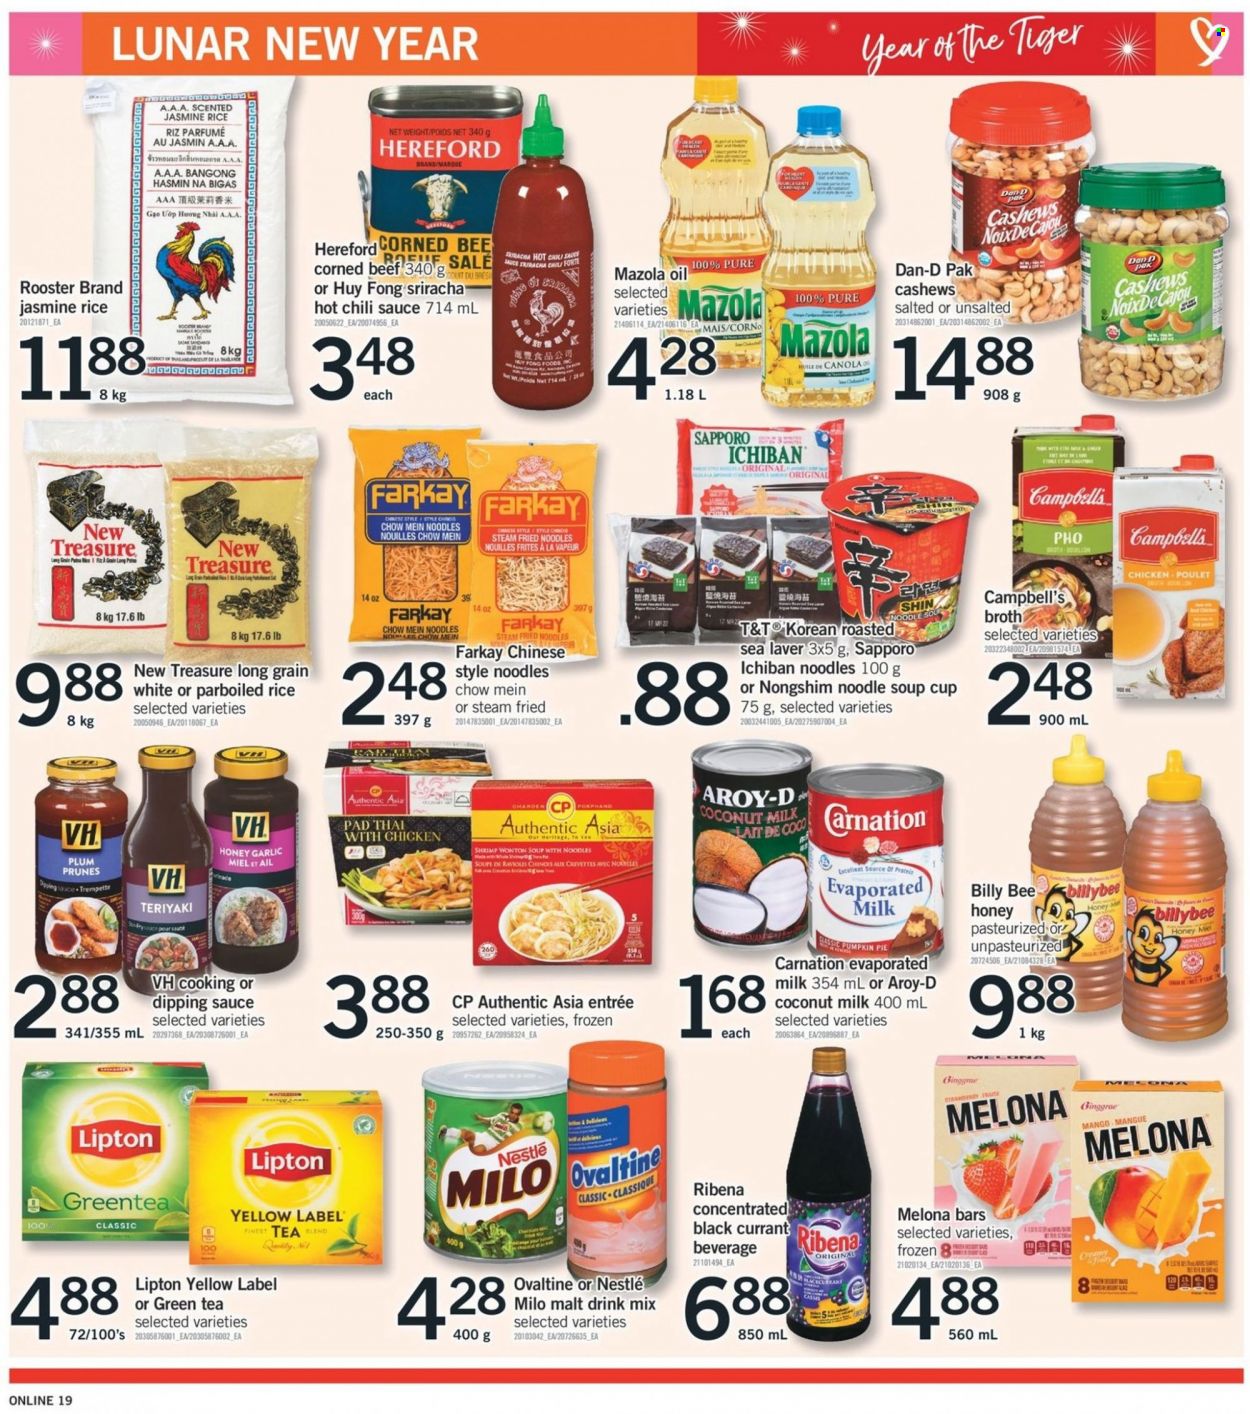 thumbnail - Fortinos Flyer - January 13, 2022 - January 19, 2022 - Sales products - pie, garlic, pumpkin, mango, shrimps, Campbell's, soup, sauce, noodles cup, corned beef, evaporated milk, Milo, broth, malt, coconut milk, Dan-D Pak, rice, jasmine rice, parboiled rice, sriracha, chilli sauce, oil, honey, cashews, prunes, dried fruit, green tea, gin, beef meat, cup, pin, Billy, Nestlé, LG, Lipton. Page 20.